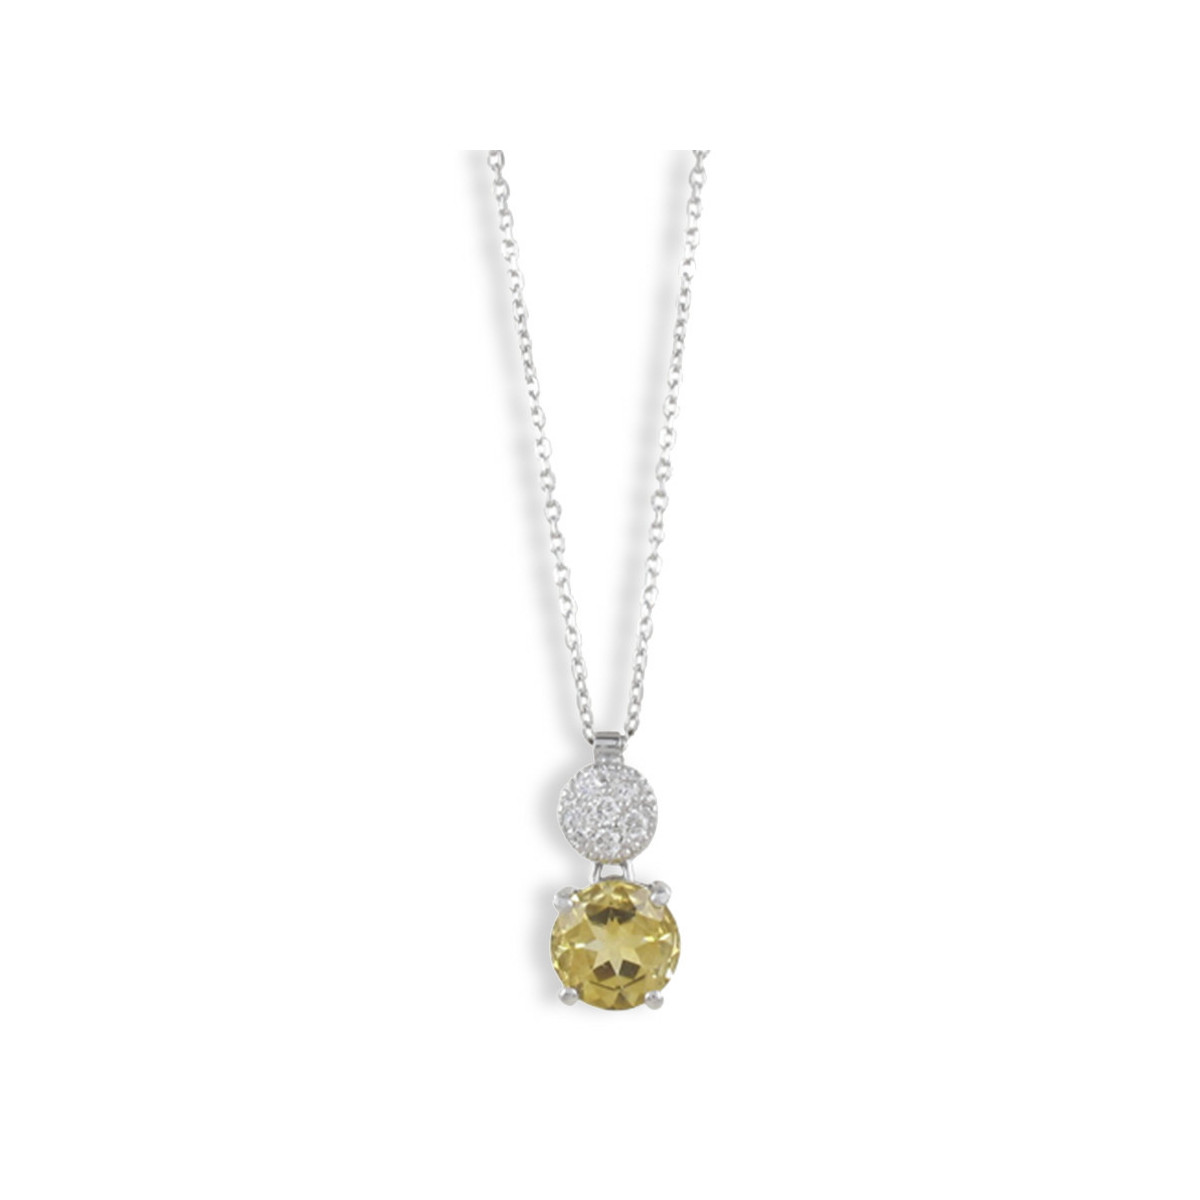 GOLD DIAMOND AND TOPAZ NECKLACE